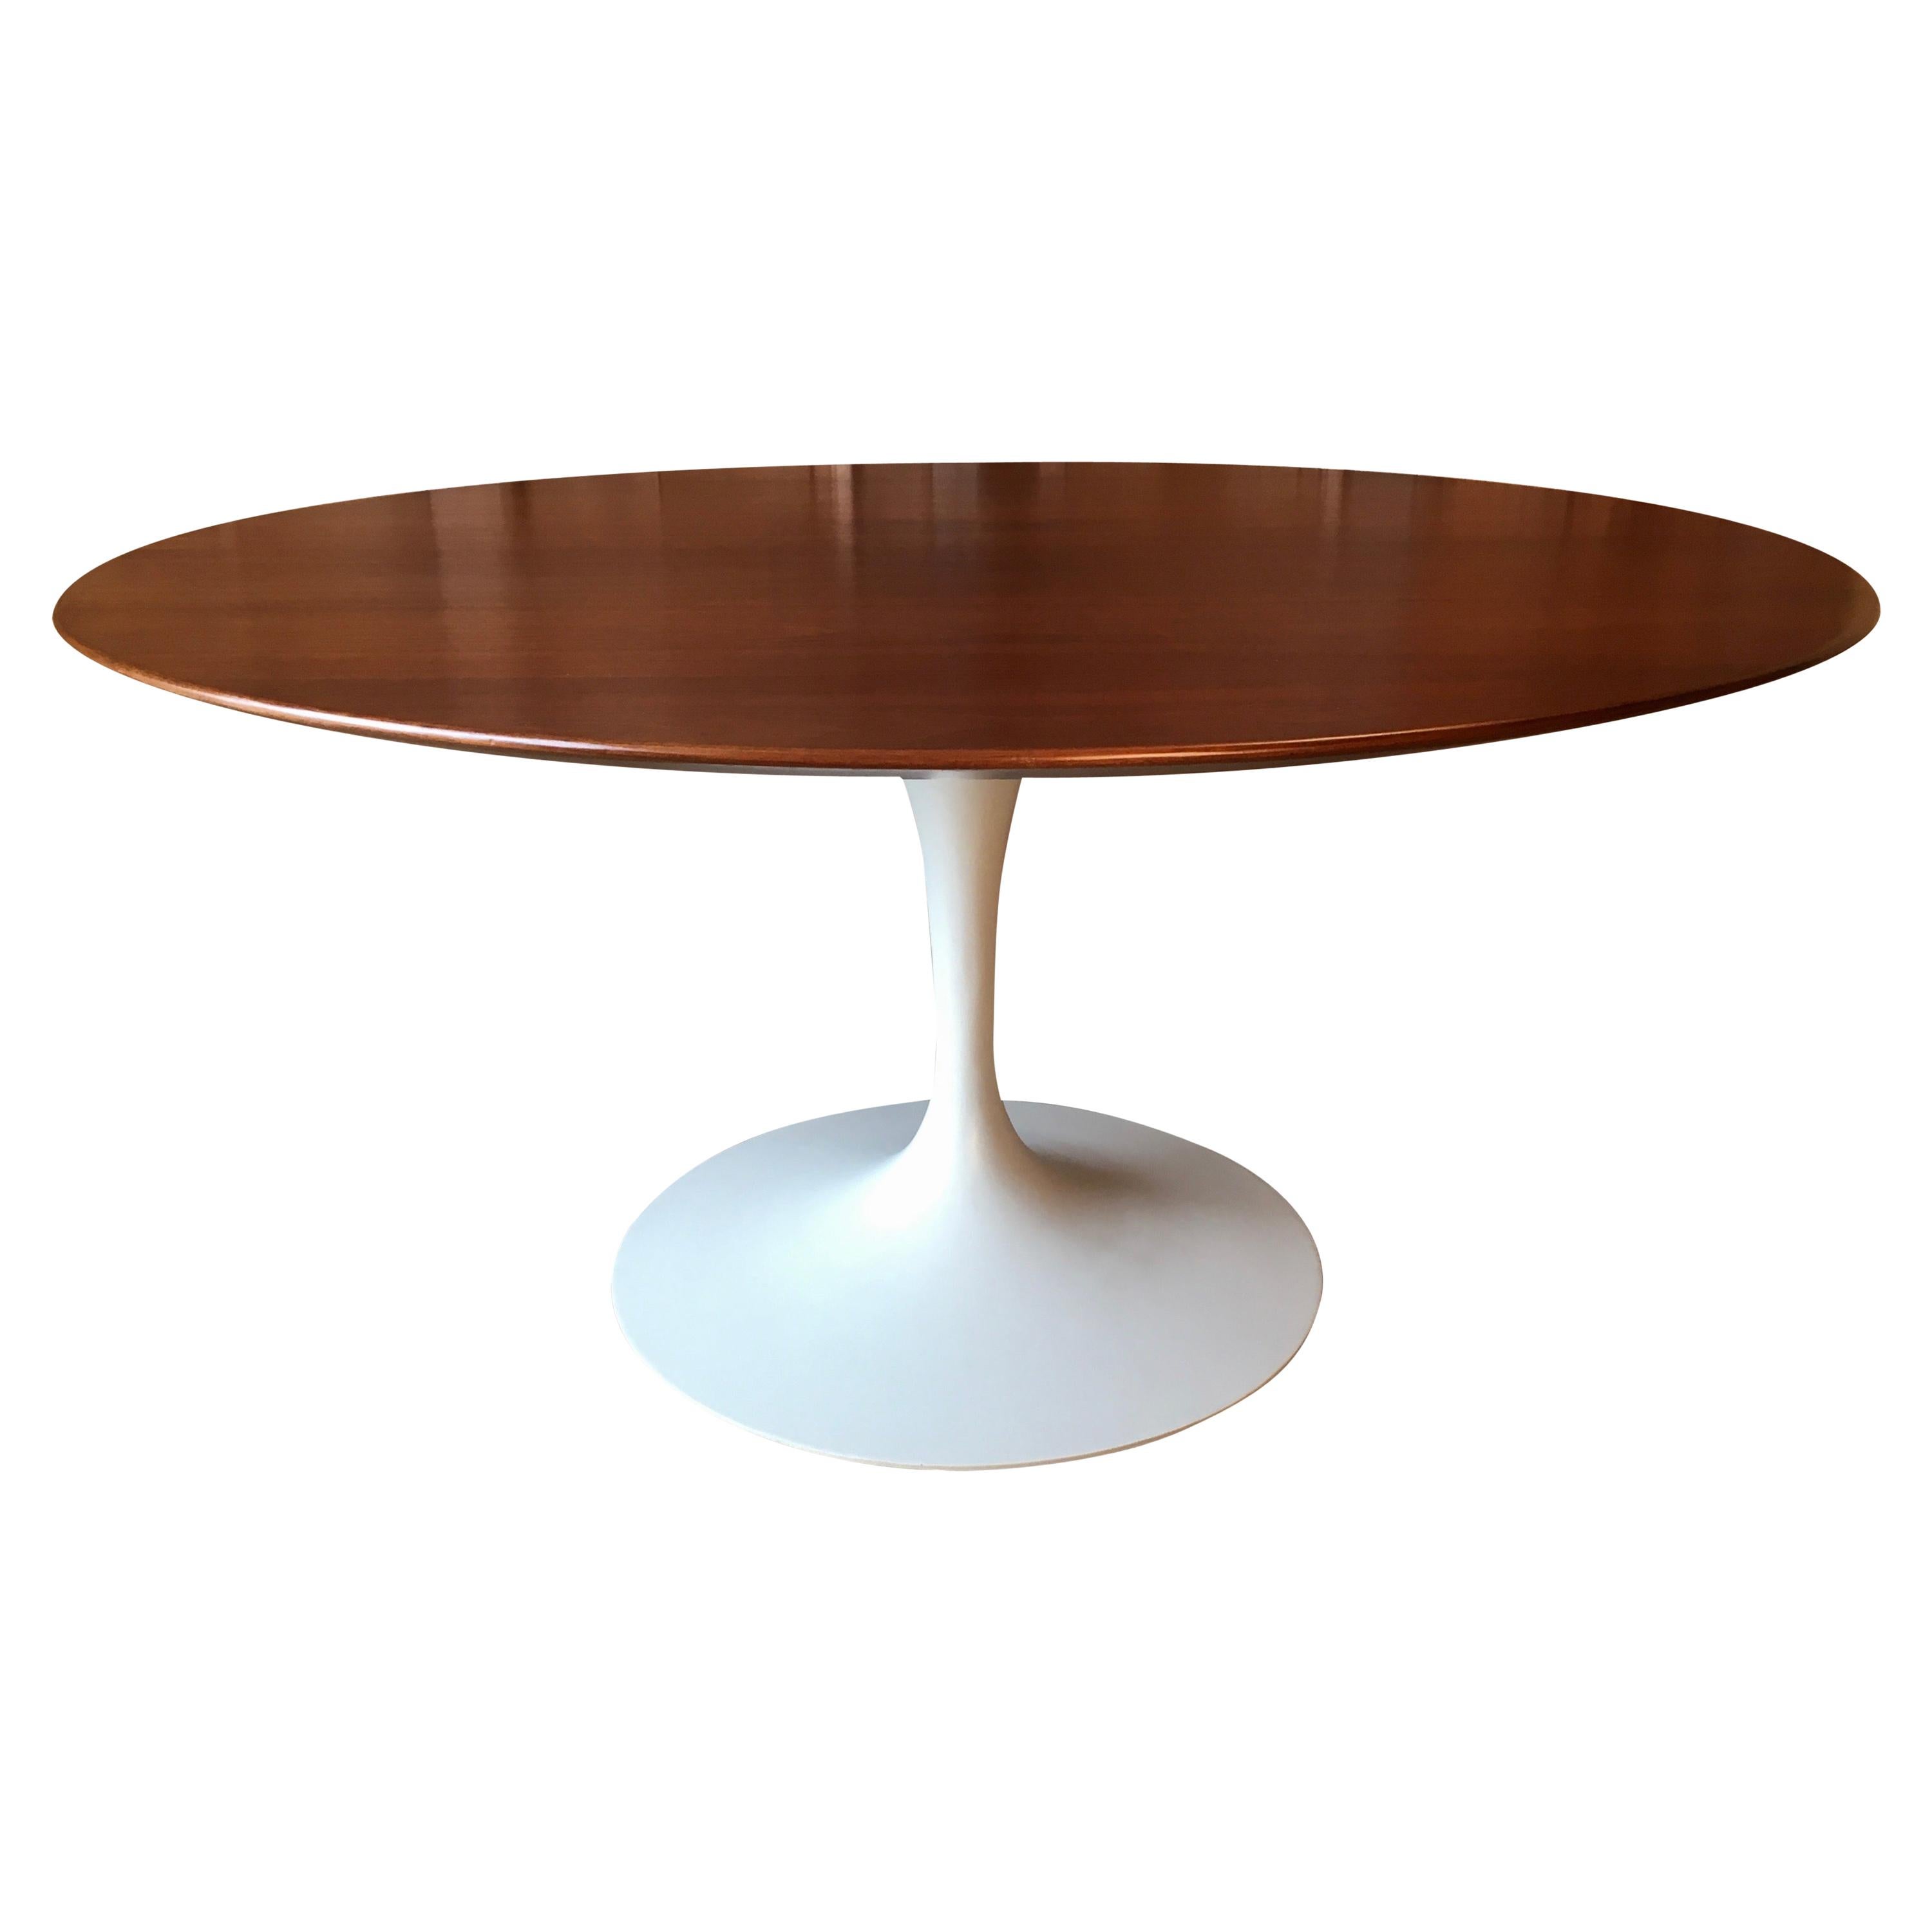 Eero Saarinen Walnut and Off-White Tulip Dining Table for Knoll